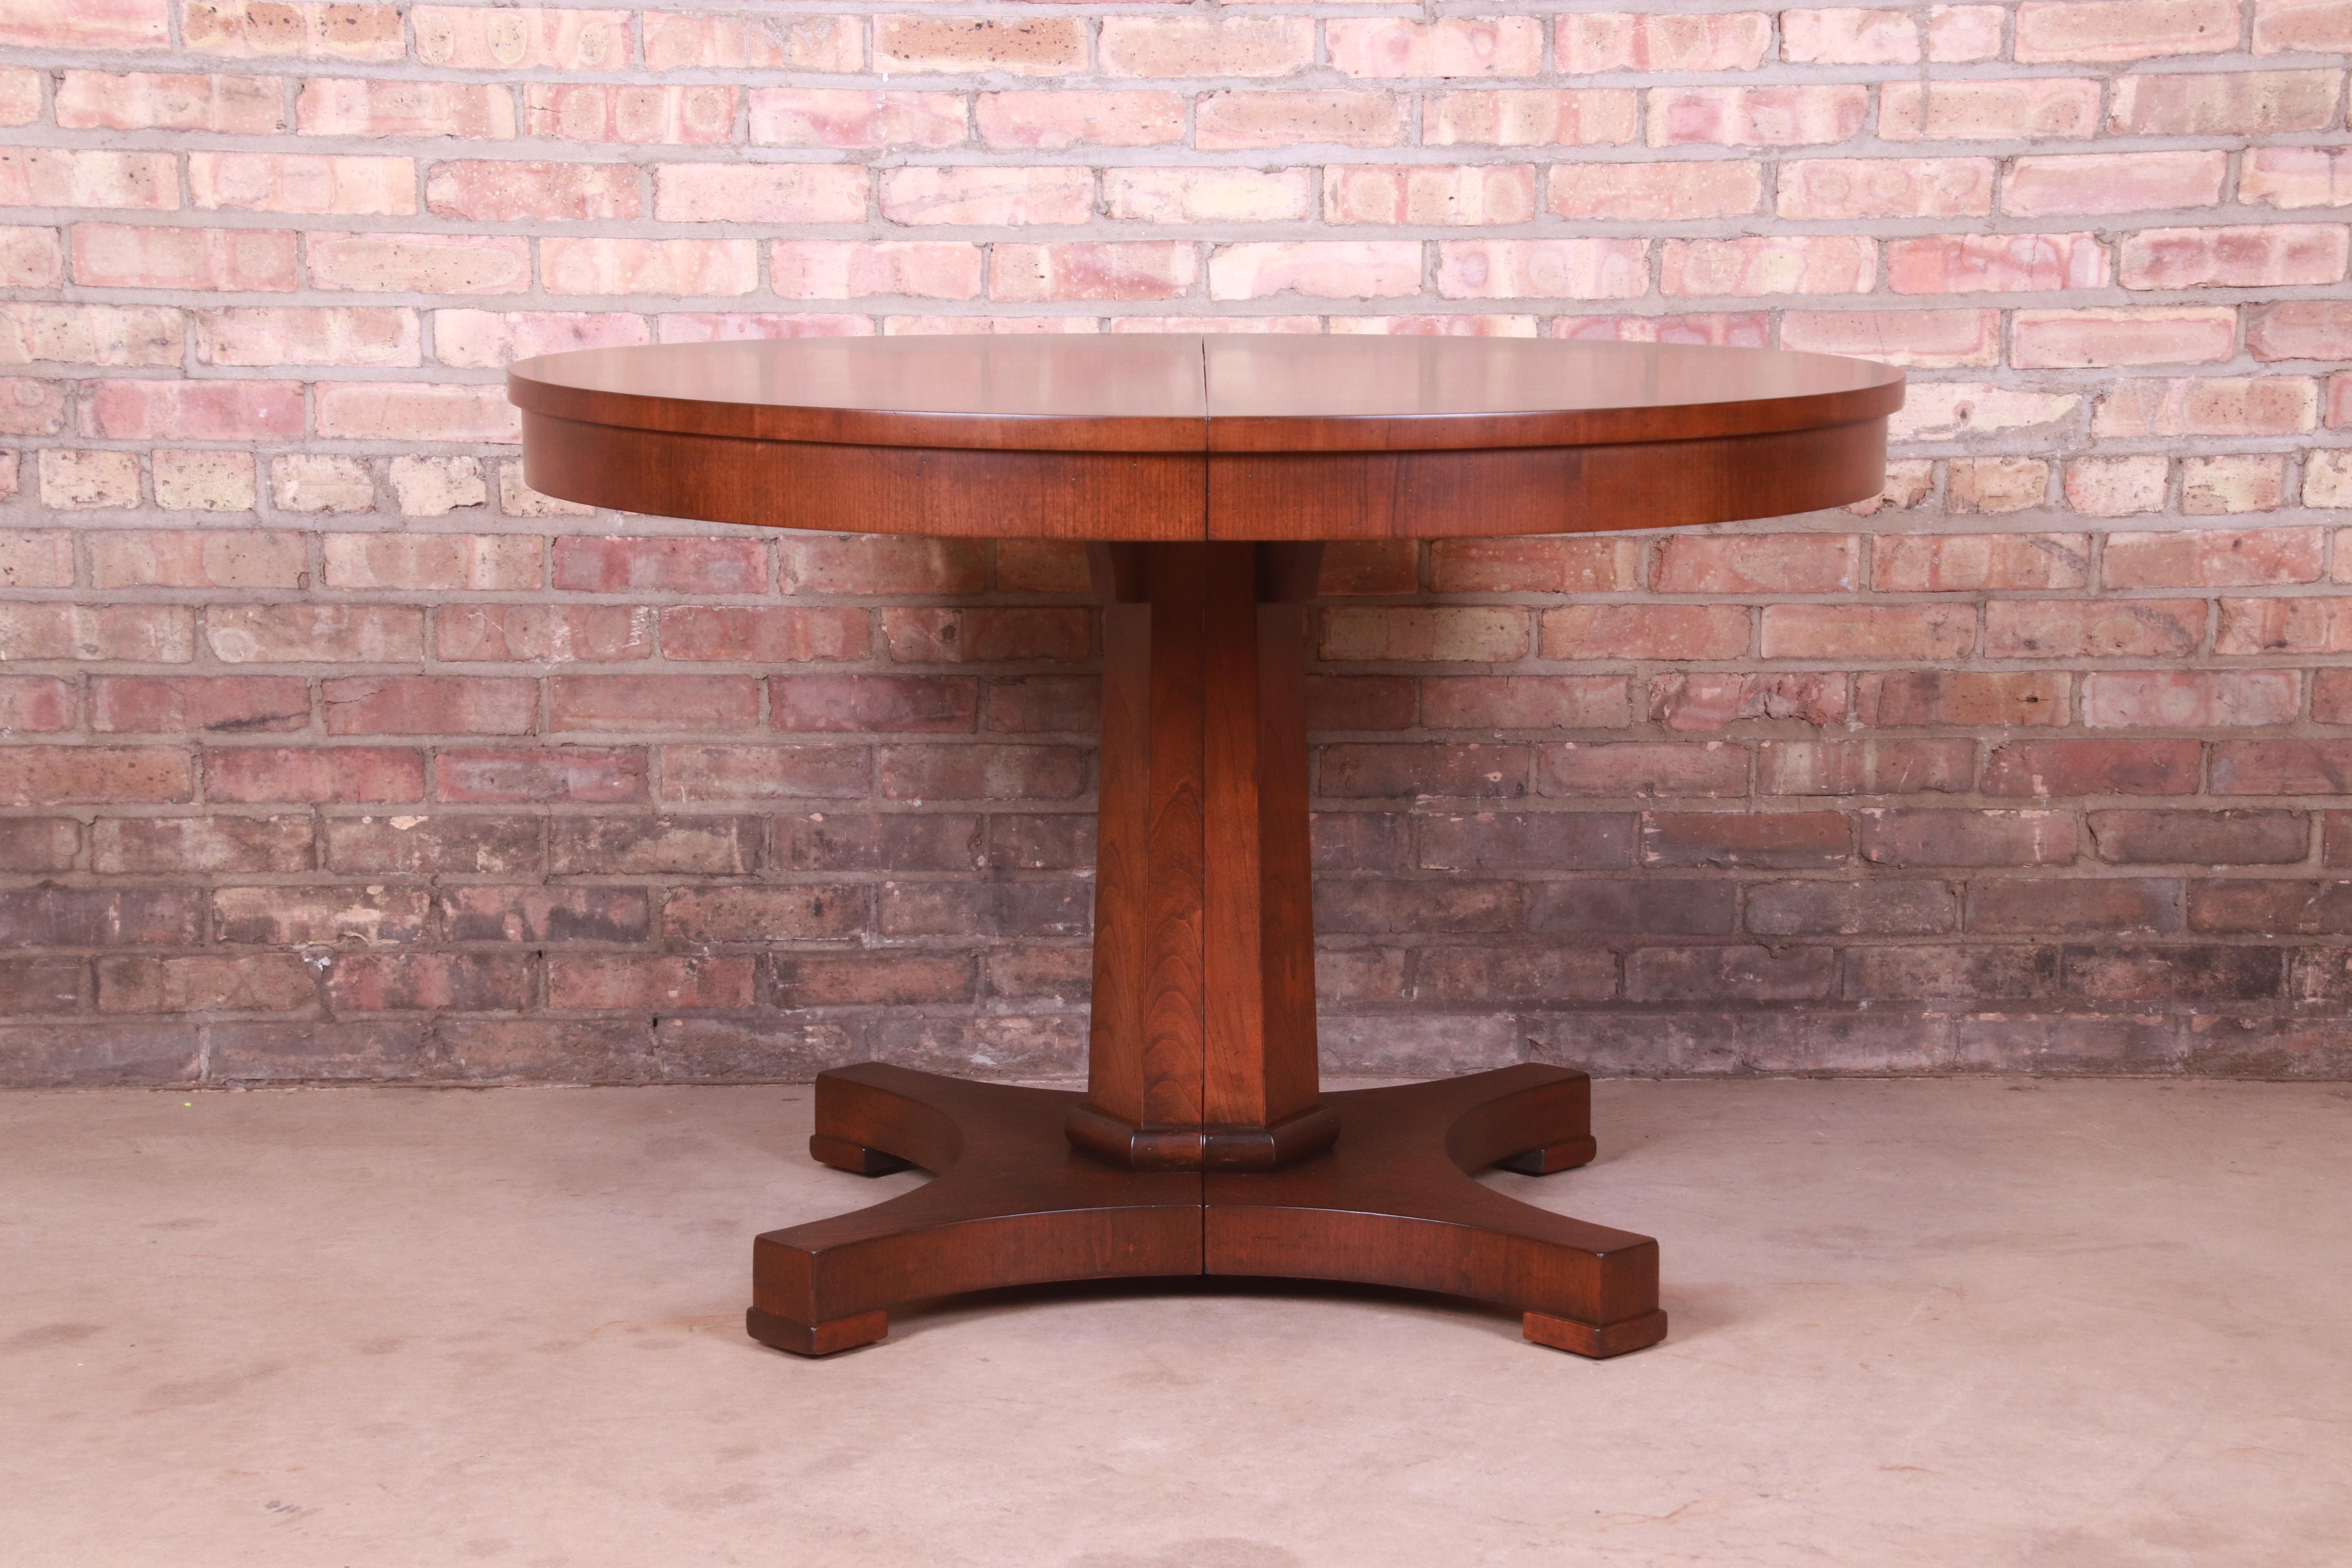 Baker Furniture Regency Cherry Wood Pedestal Dining Table, Newly Refinished 6